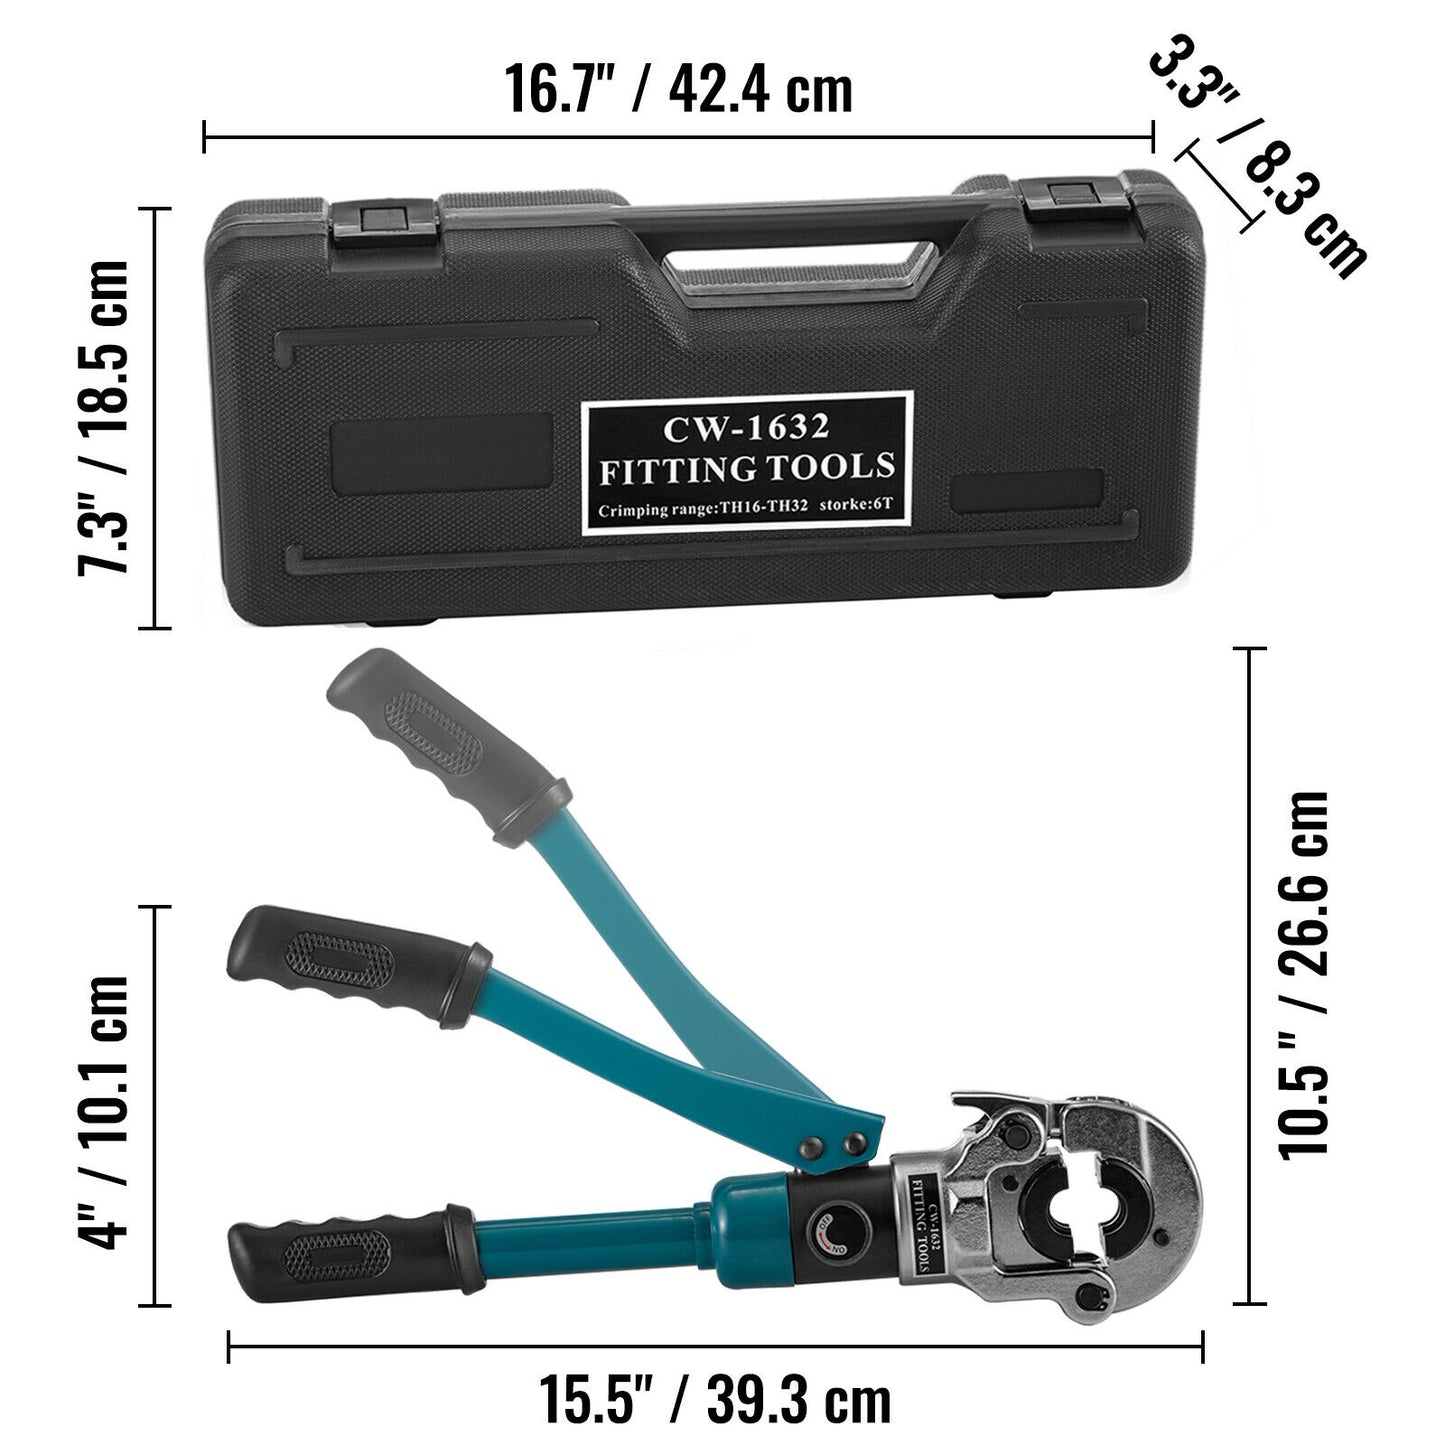 Hydraulic Pex Pipe Crimping Tool for Aluminum Plastic Tube with Pressure up to 1632